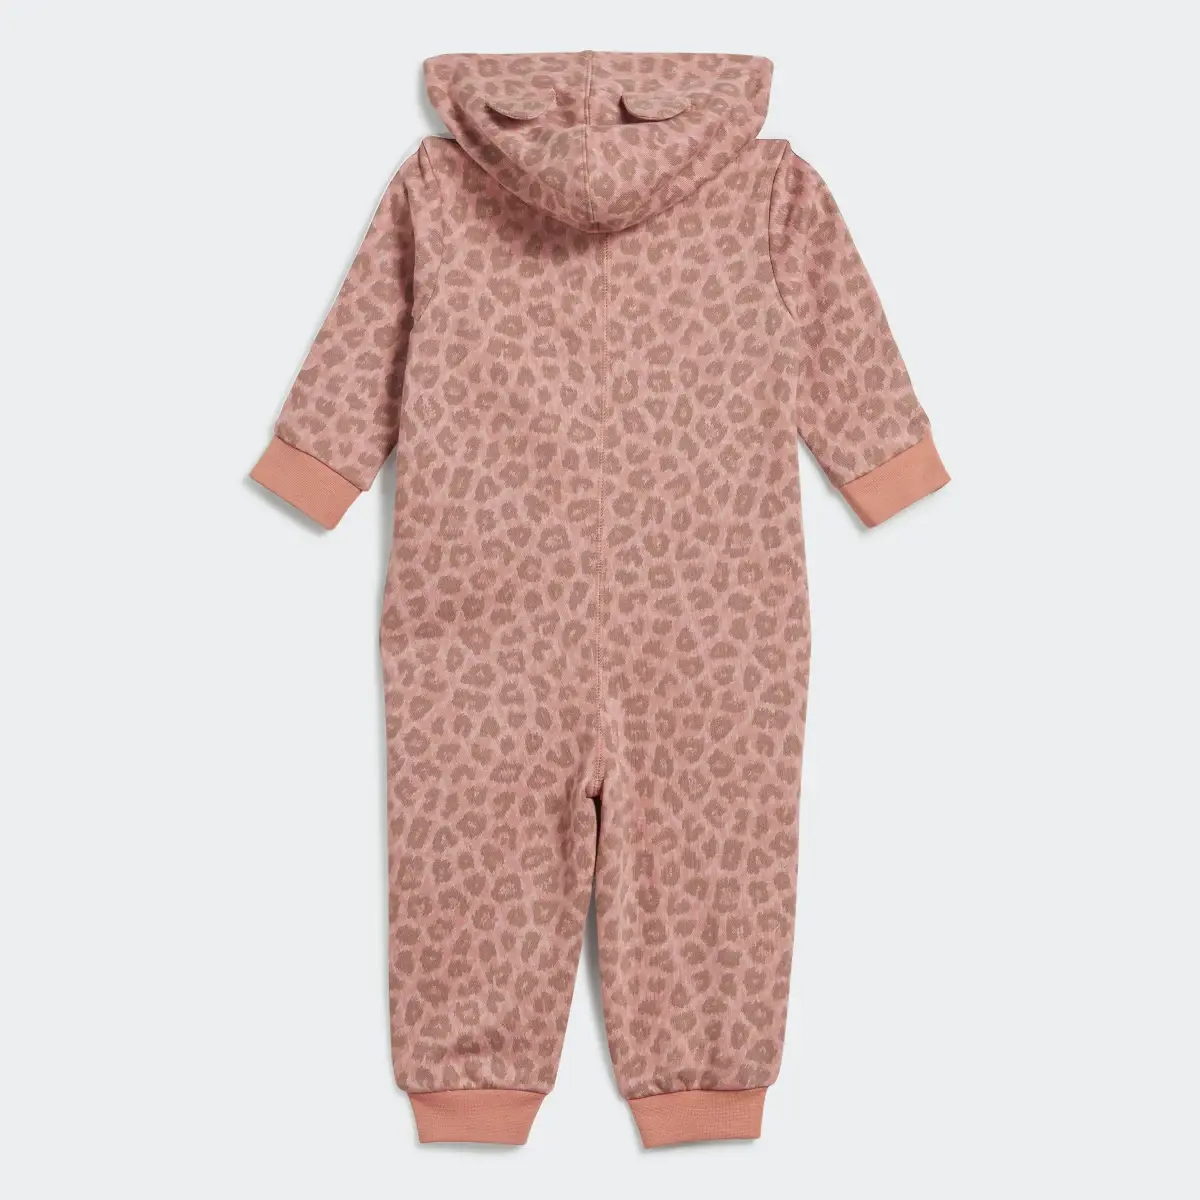 Adidas Animal Allover Print Hooded Bodysuit with Ears. 3